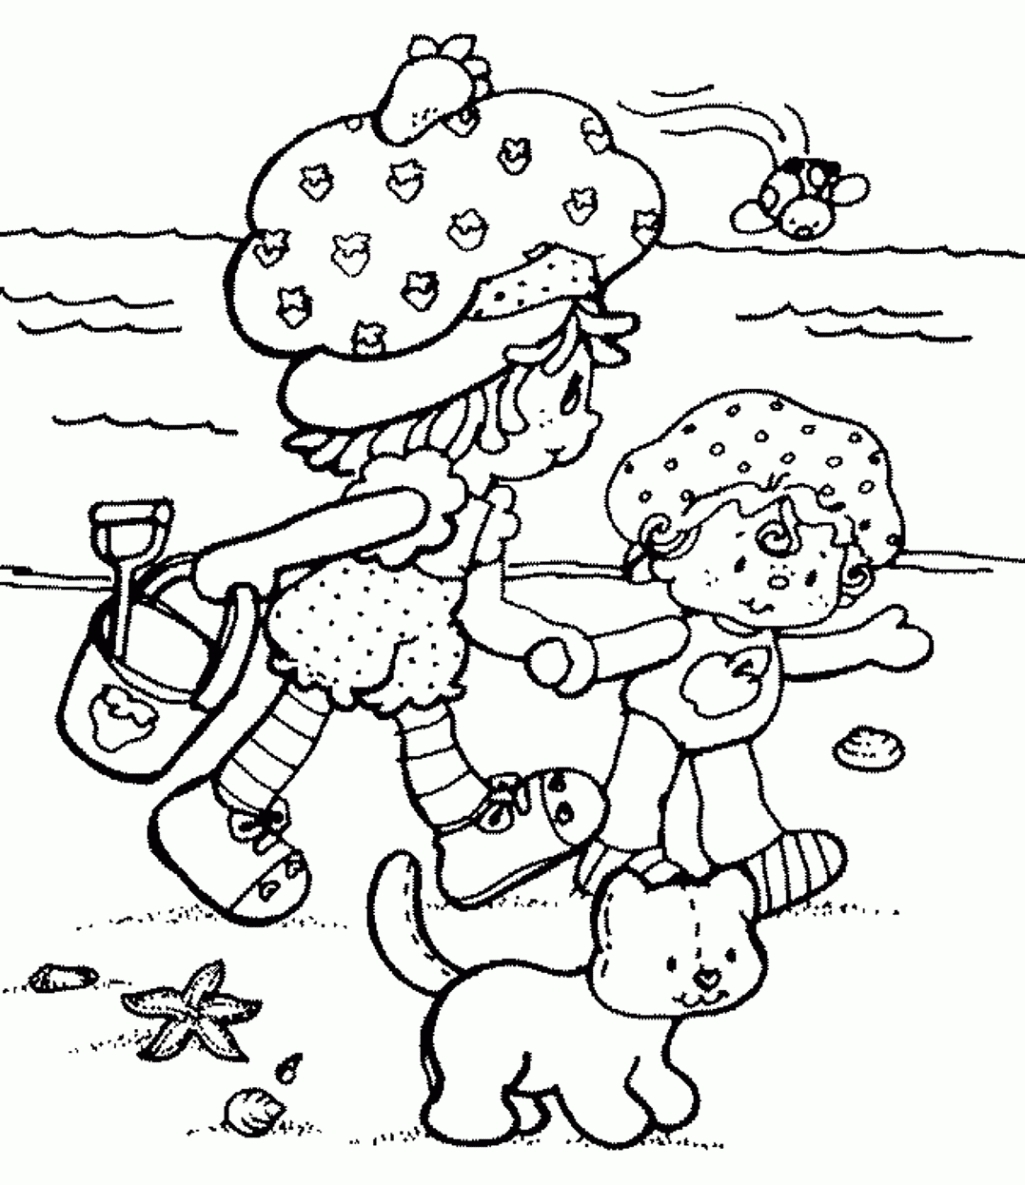 Download 27 Summer season coloring pages part 2 | Free Printables